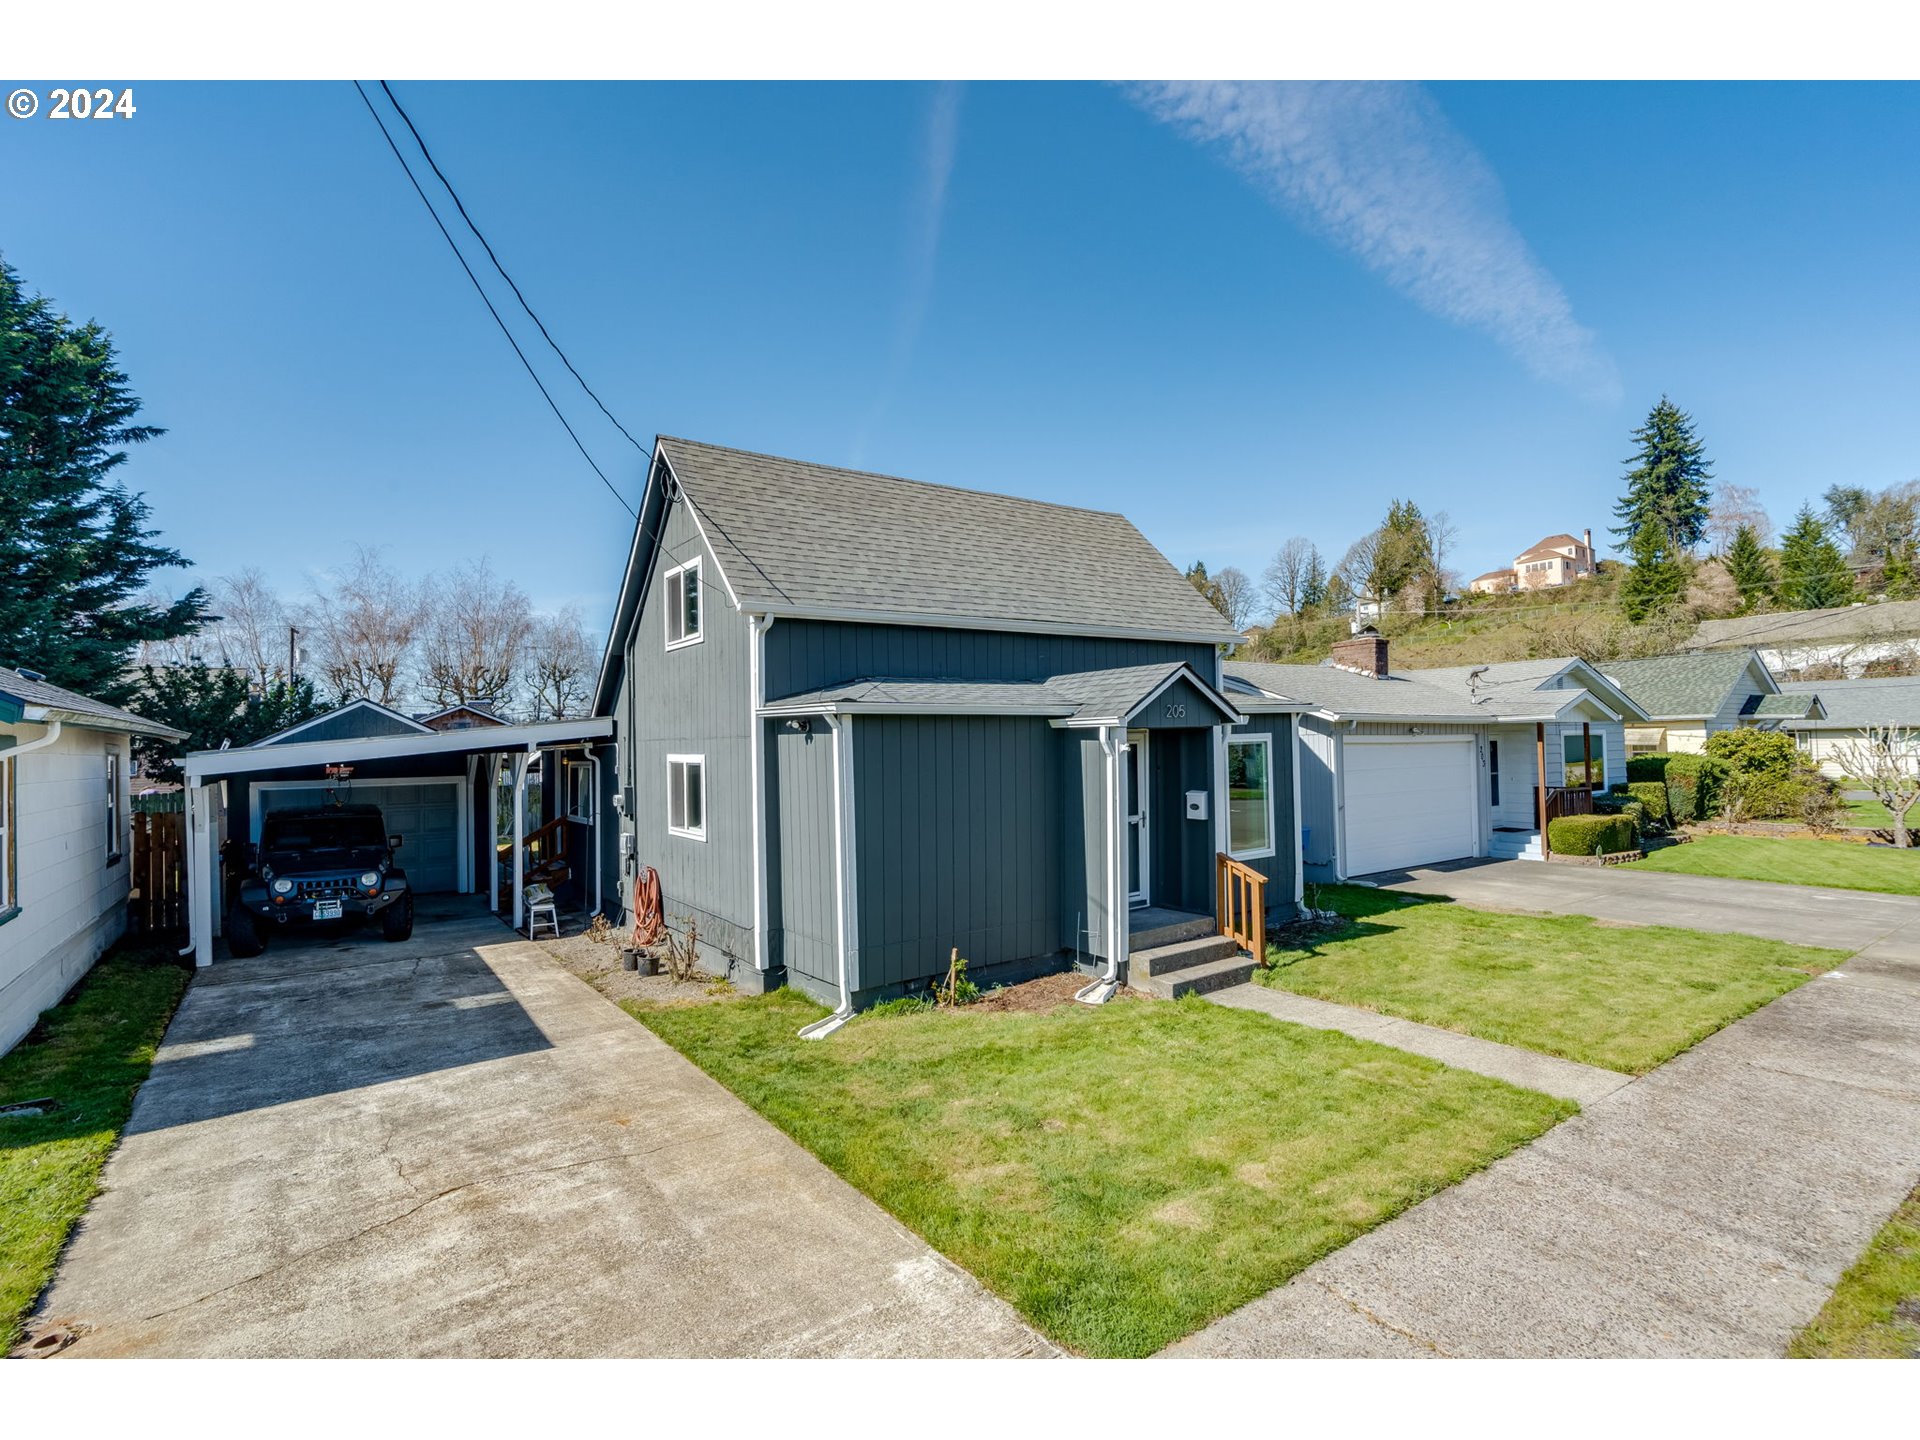 205 S 9TH AVE, Kelso, WA 